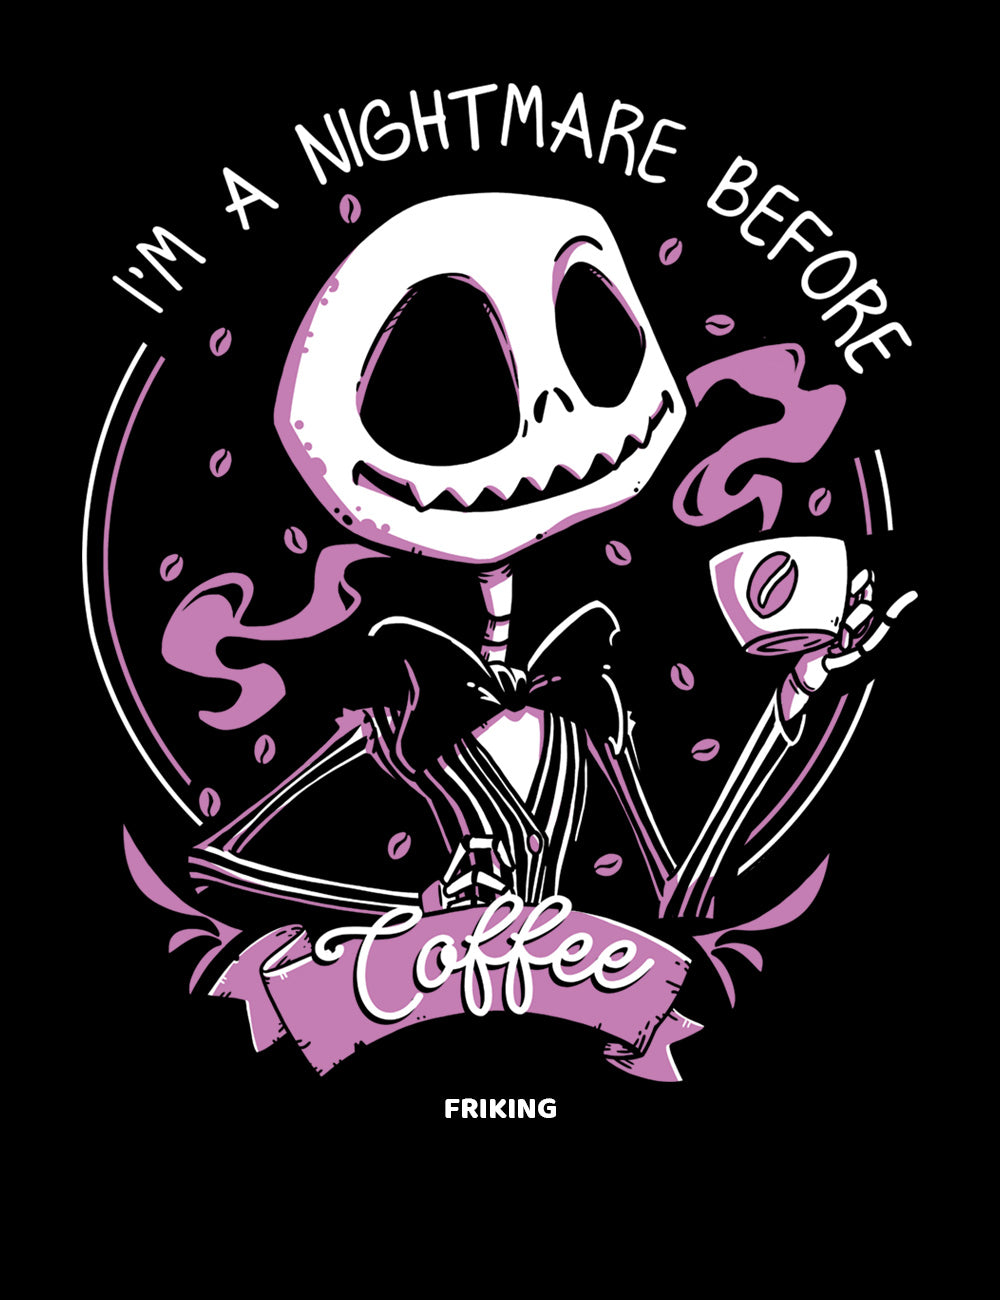 I´m a nightmare before coffee